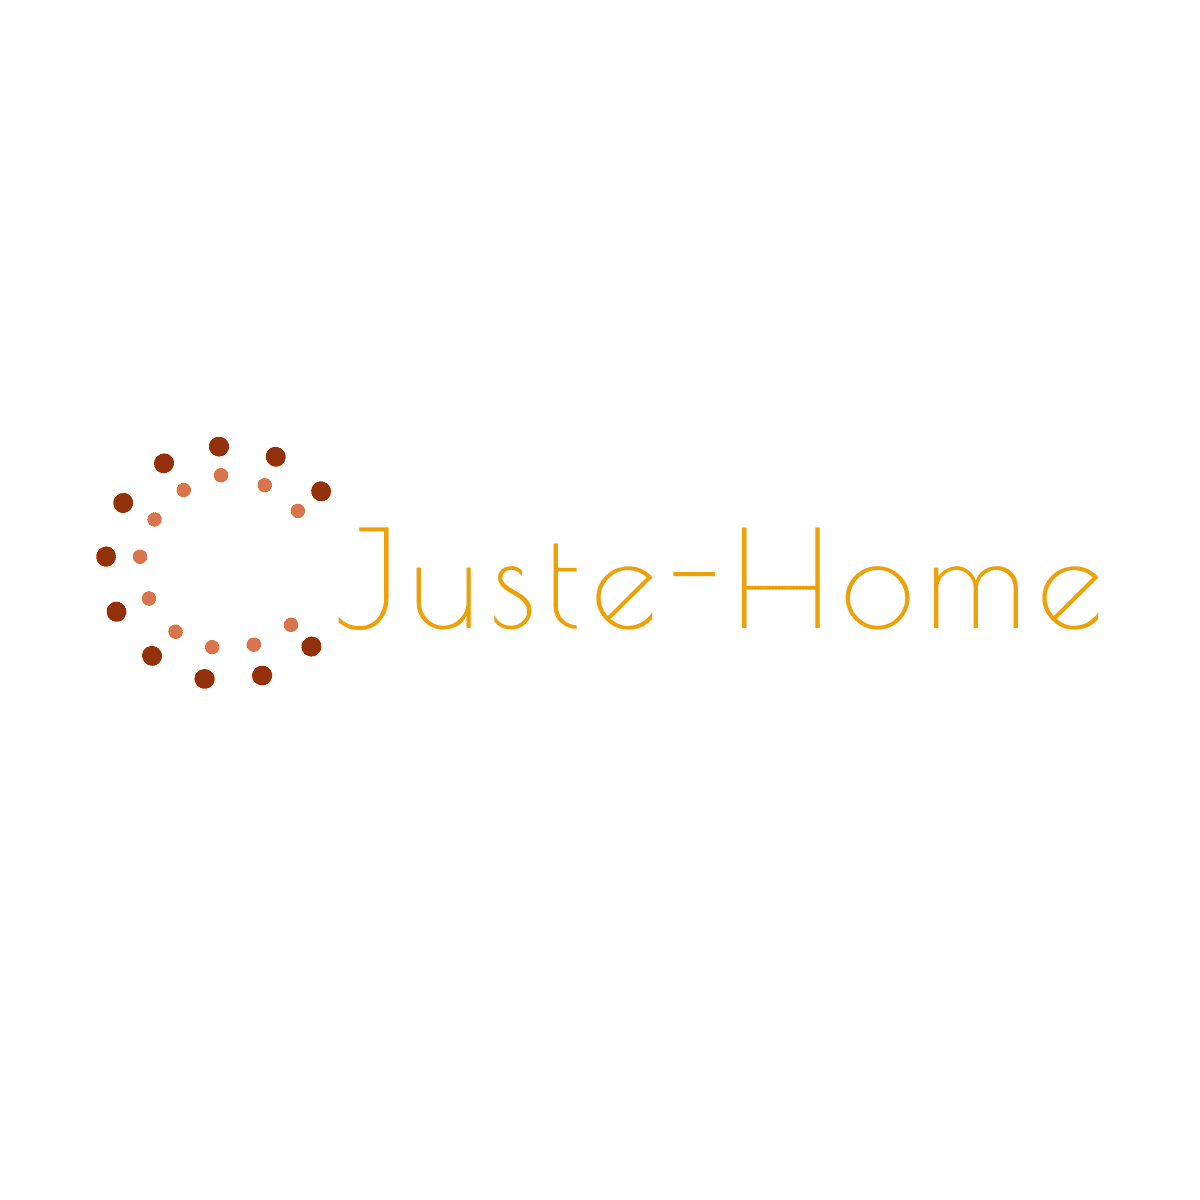 Juste-Home